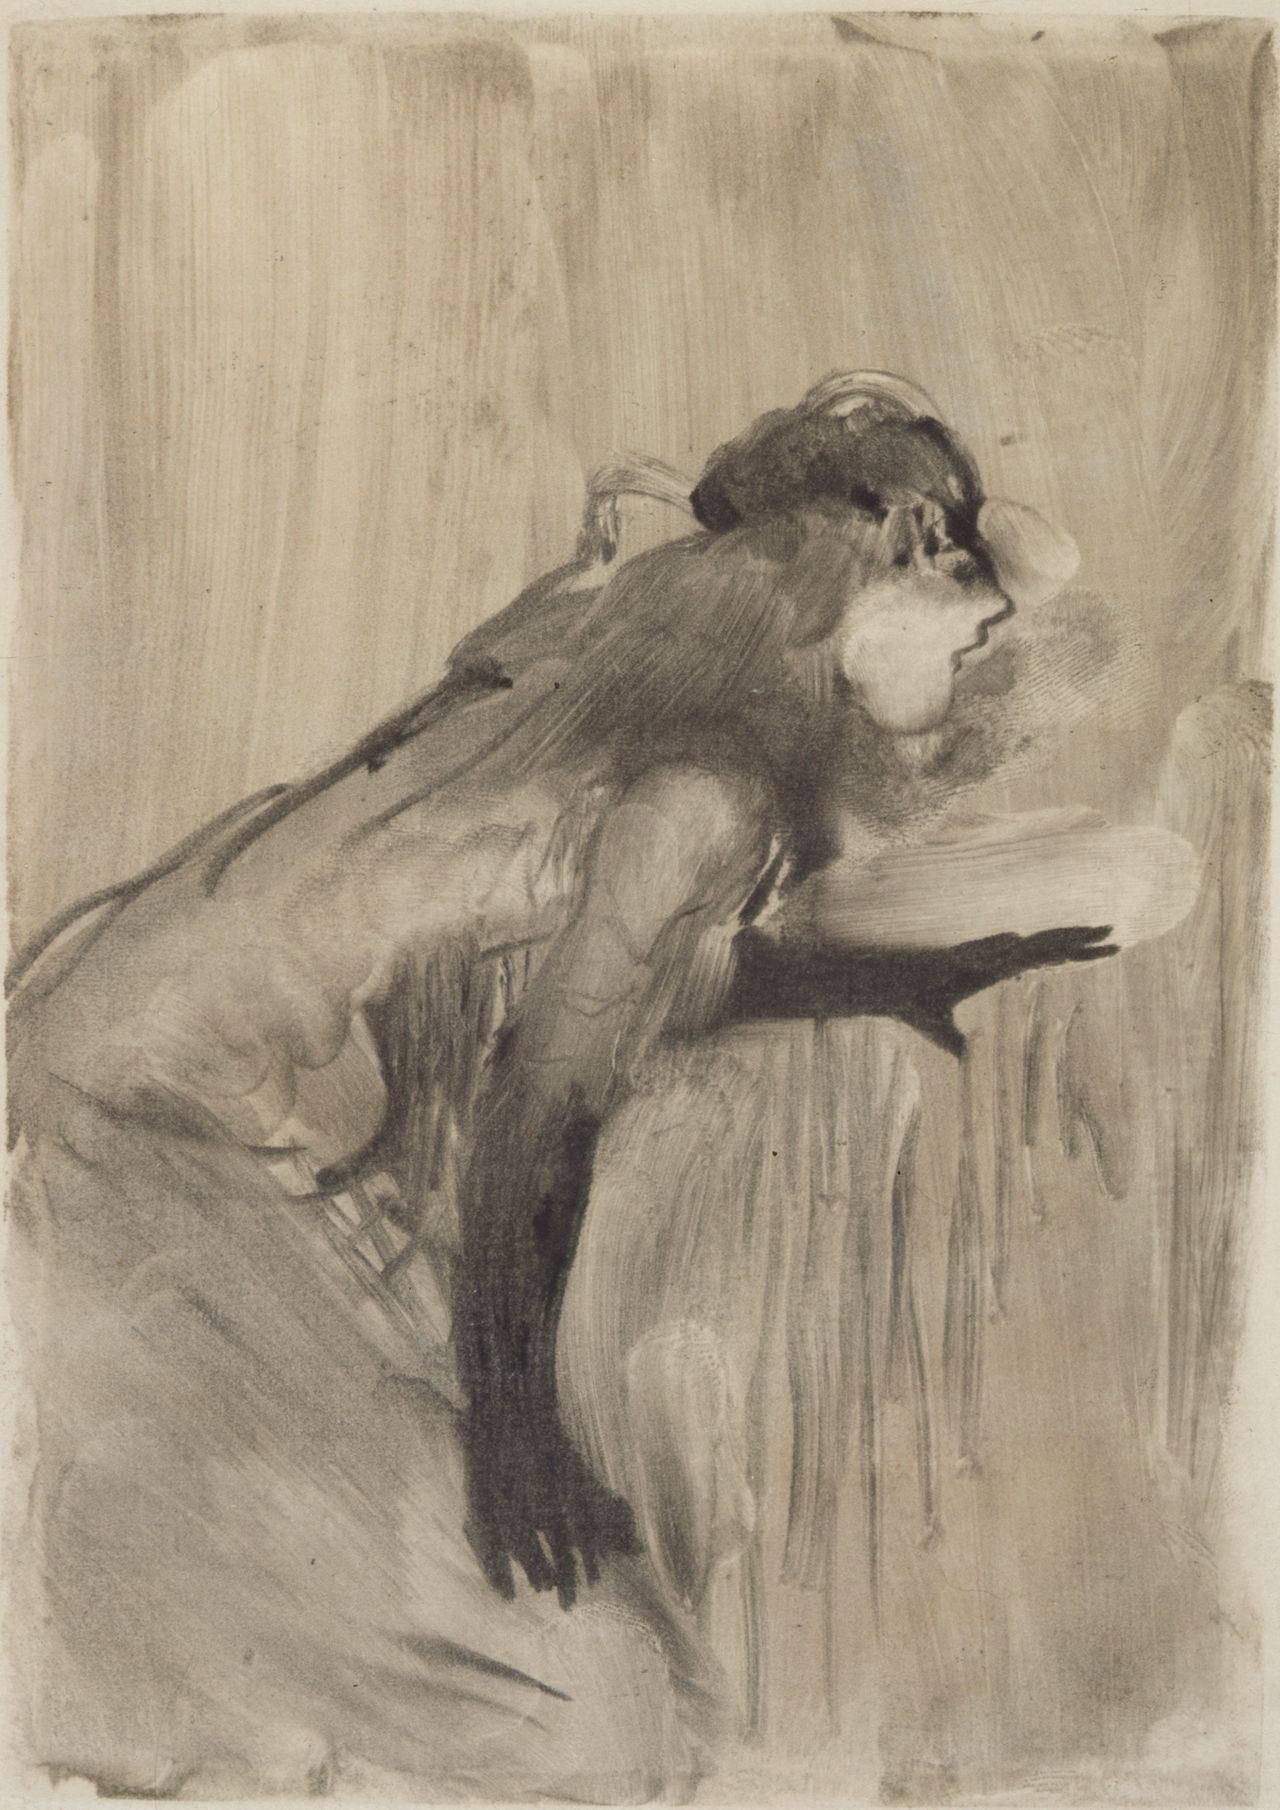 Edgar Degas (French, 1834–1917). Café-Concert Singer (Chanteuse de café-concert), c. 1877. Monotype on paper mounted on board. Plate: 7 5/16 x 5 1/16 in. (18.5 x 12.8 cm), sheet: 9 1/4 x 7 1/16 in. (23.5 x 18 cm). Private collection.